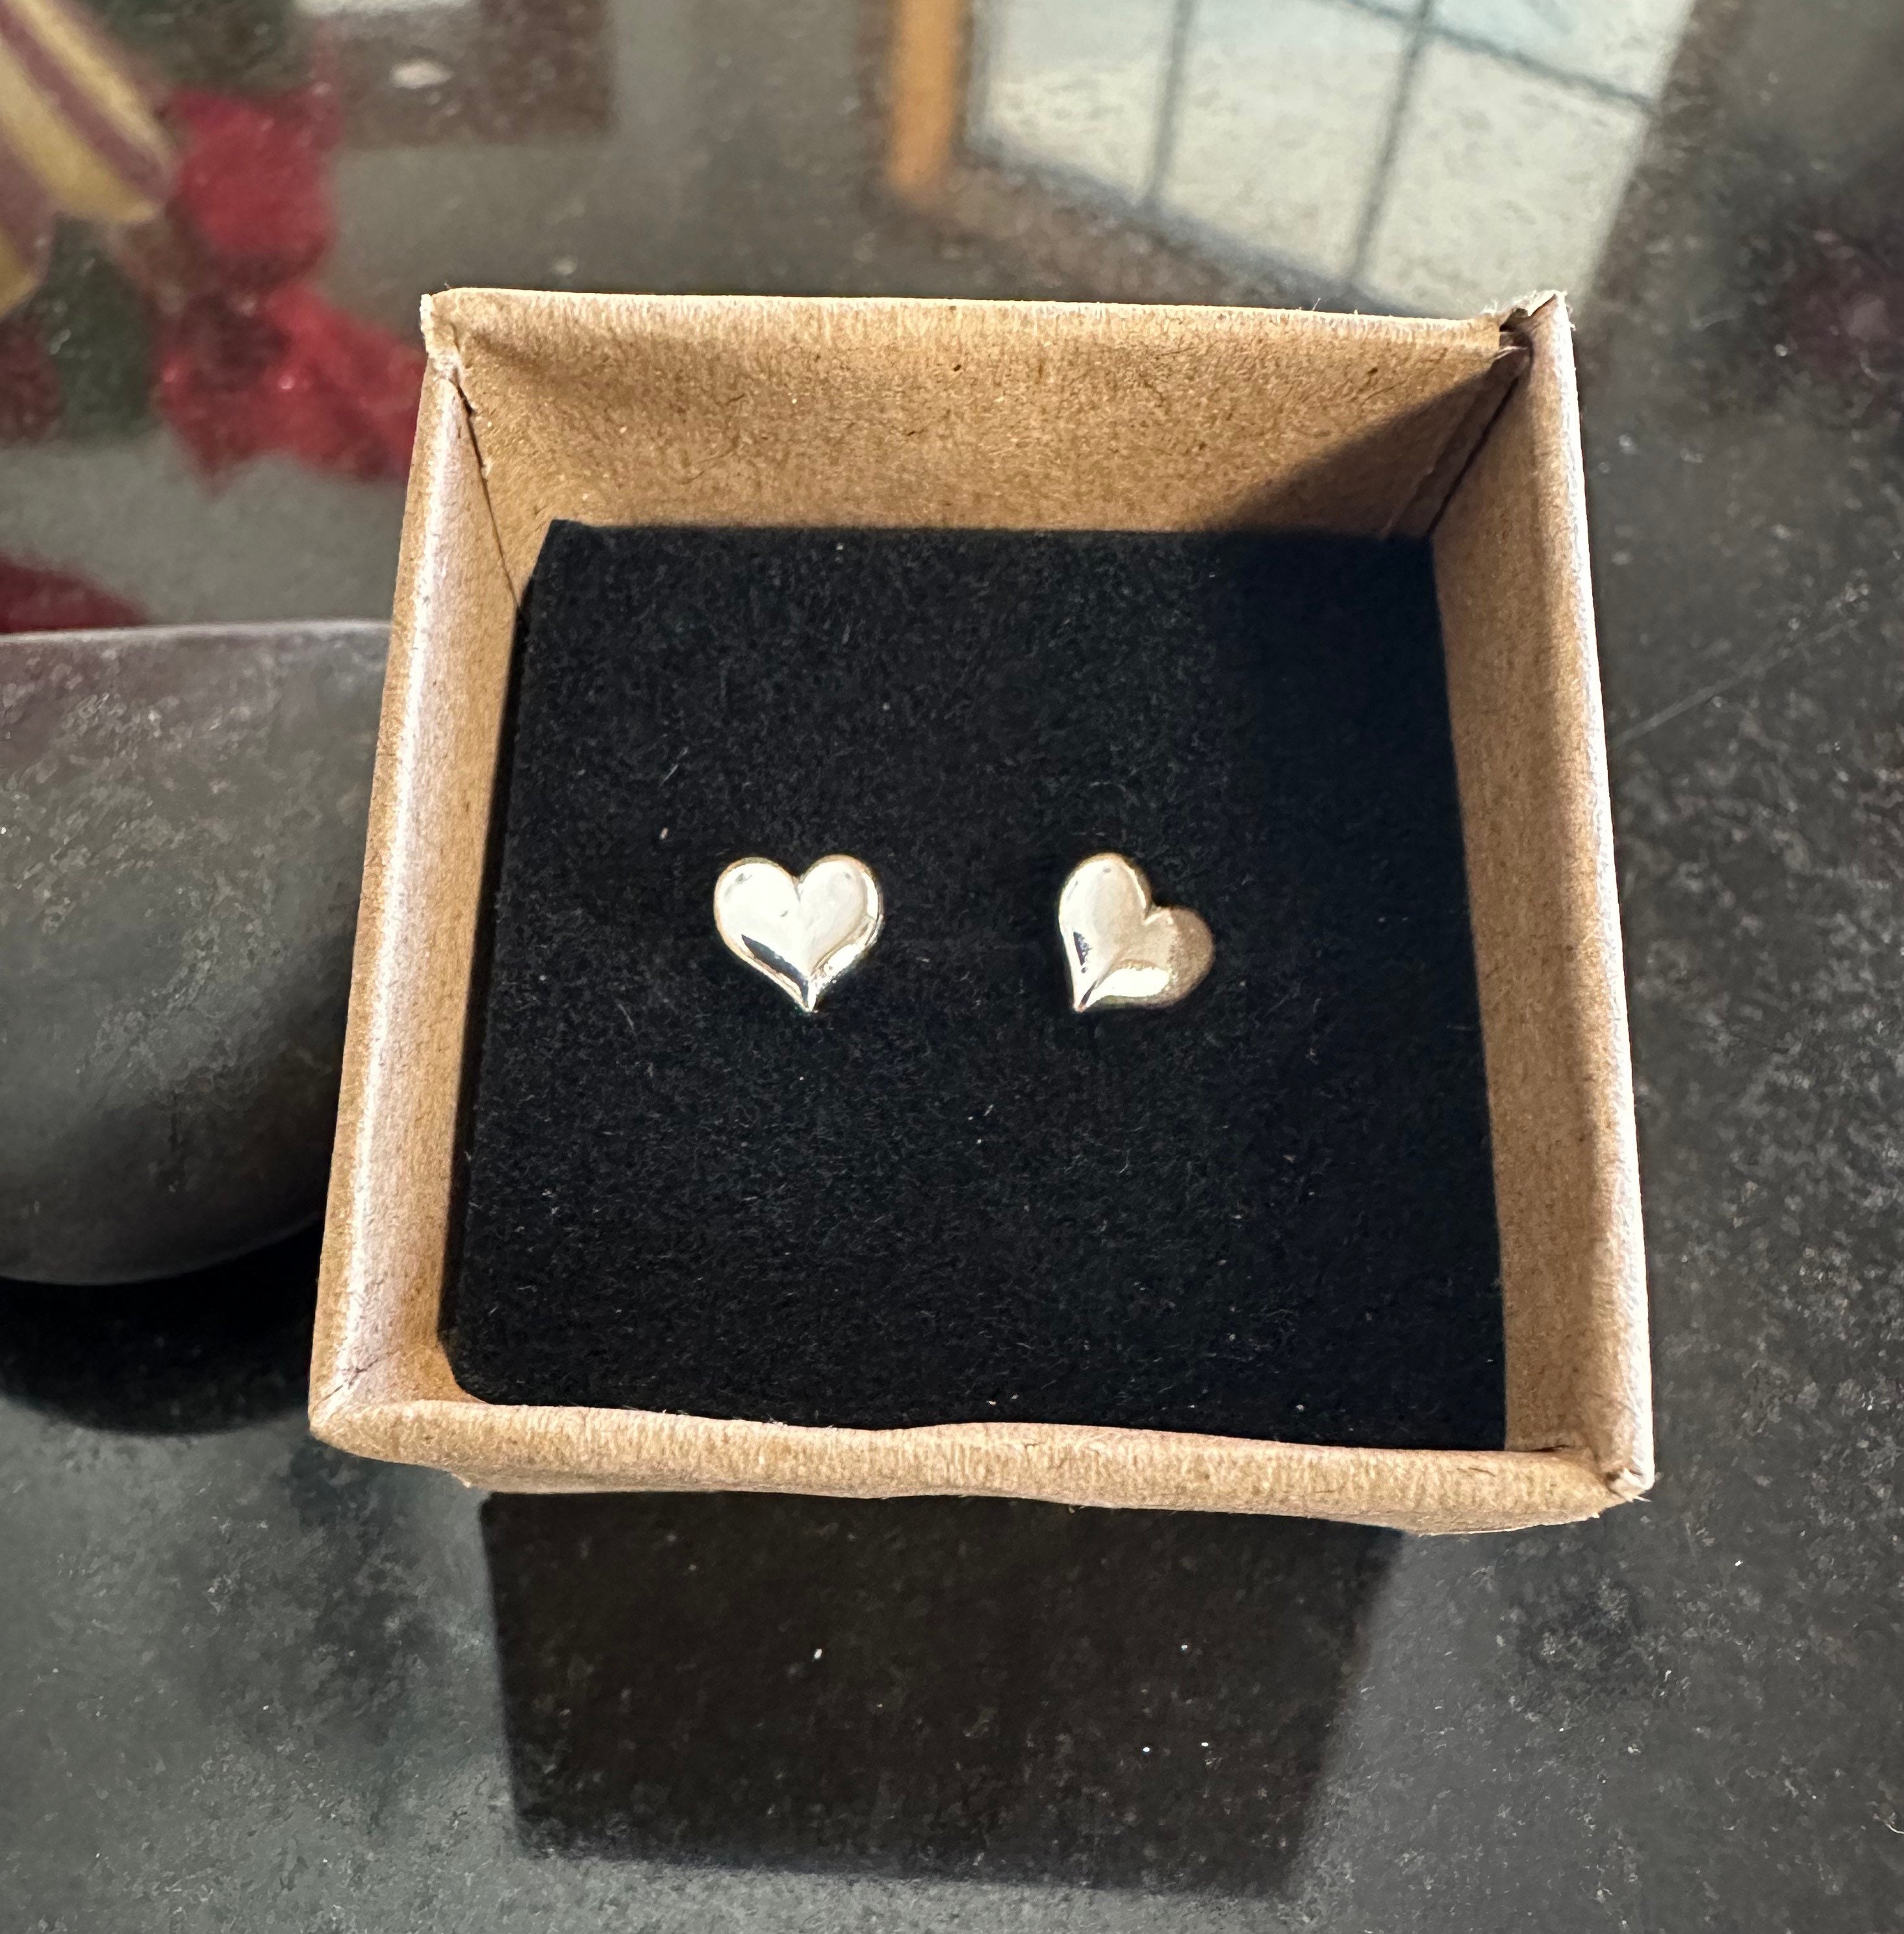 Buy Meant To Be Heart Earrings In 925 Silver from Shaya by CaratLane